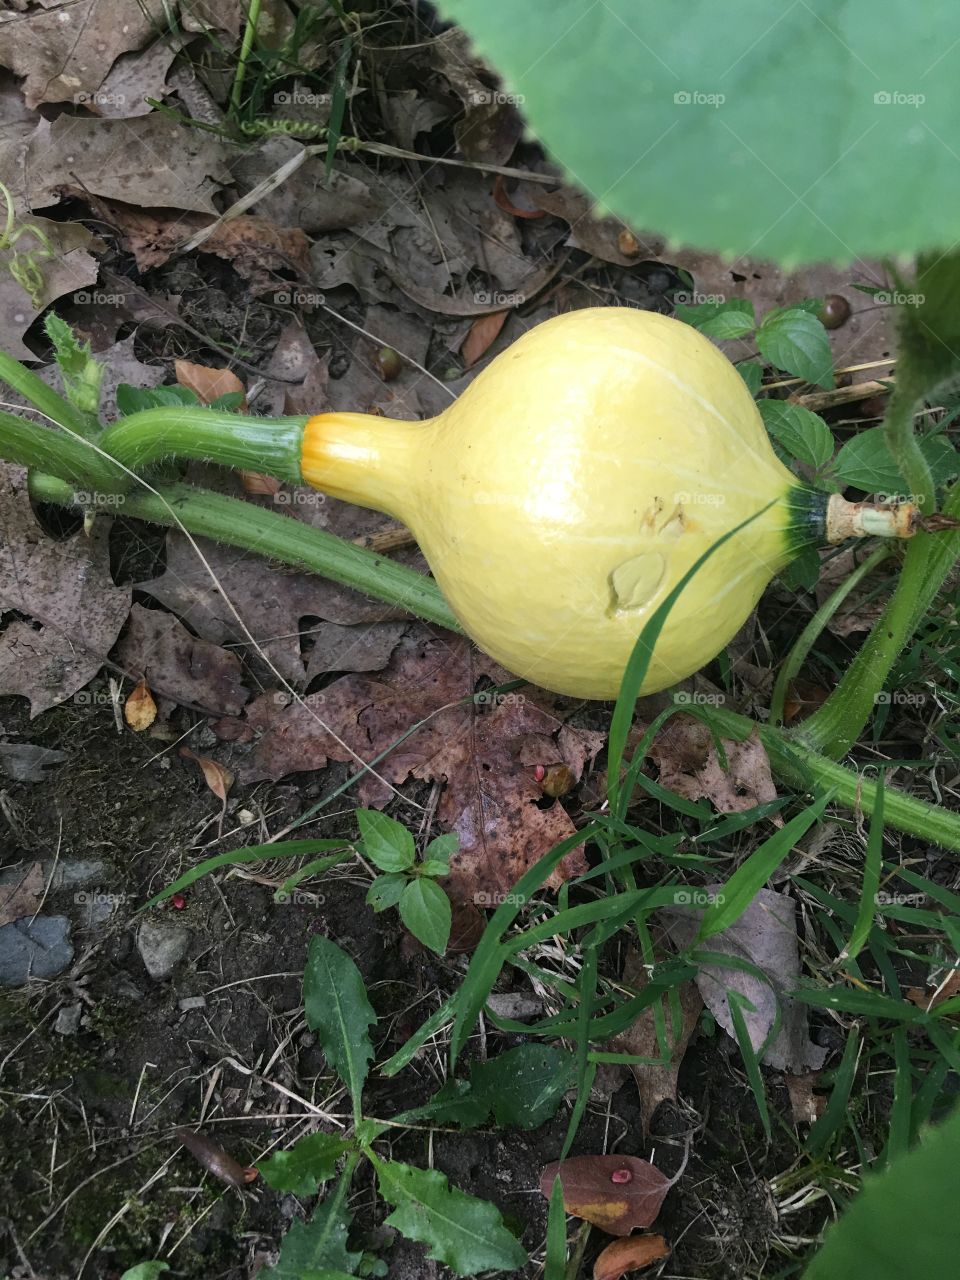 Beautiful Golden Hubbard Squash growing nicely in July!